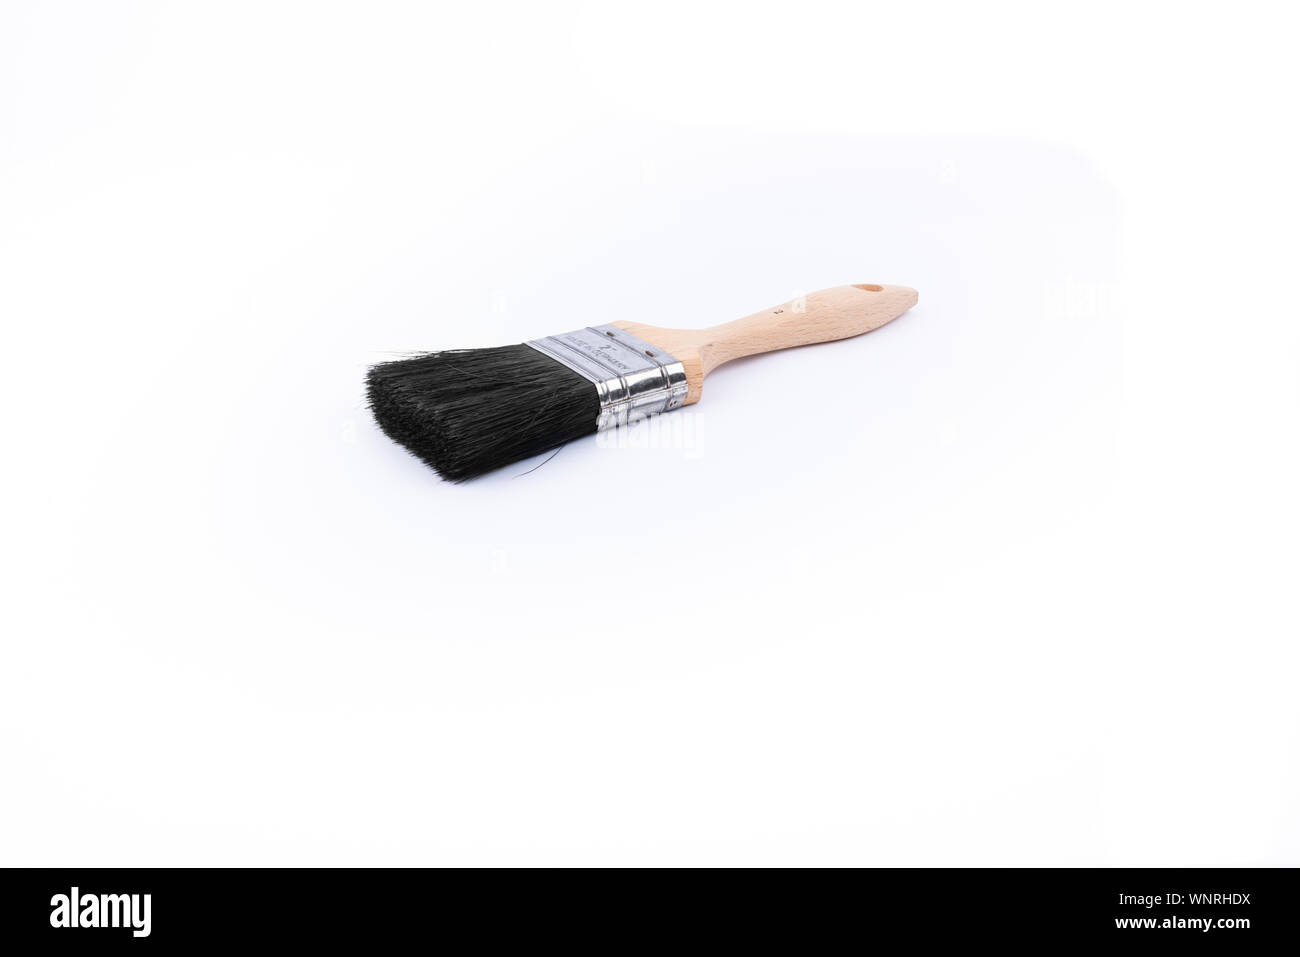 used paintbrush with wooden grip Stock Photo